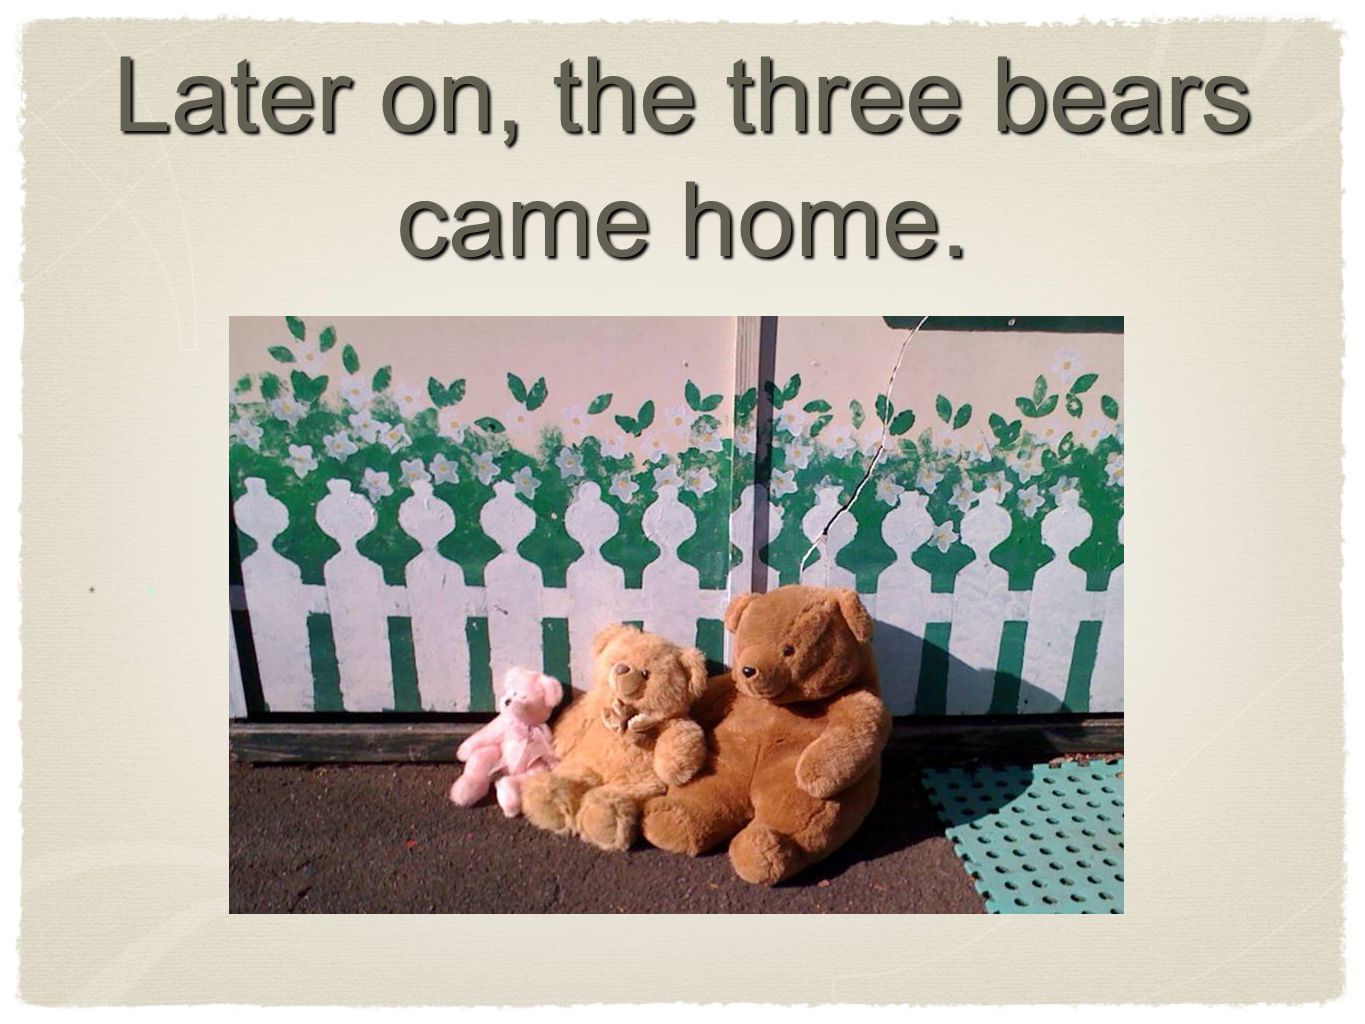 Later on, the three bears came home. x